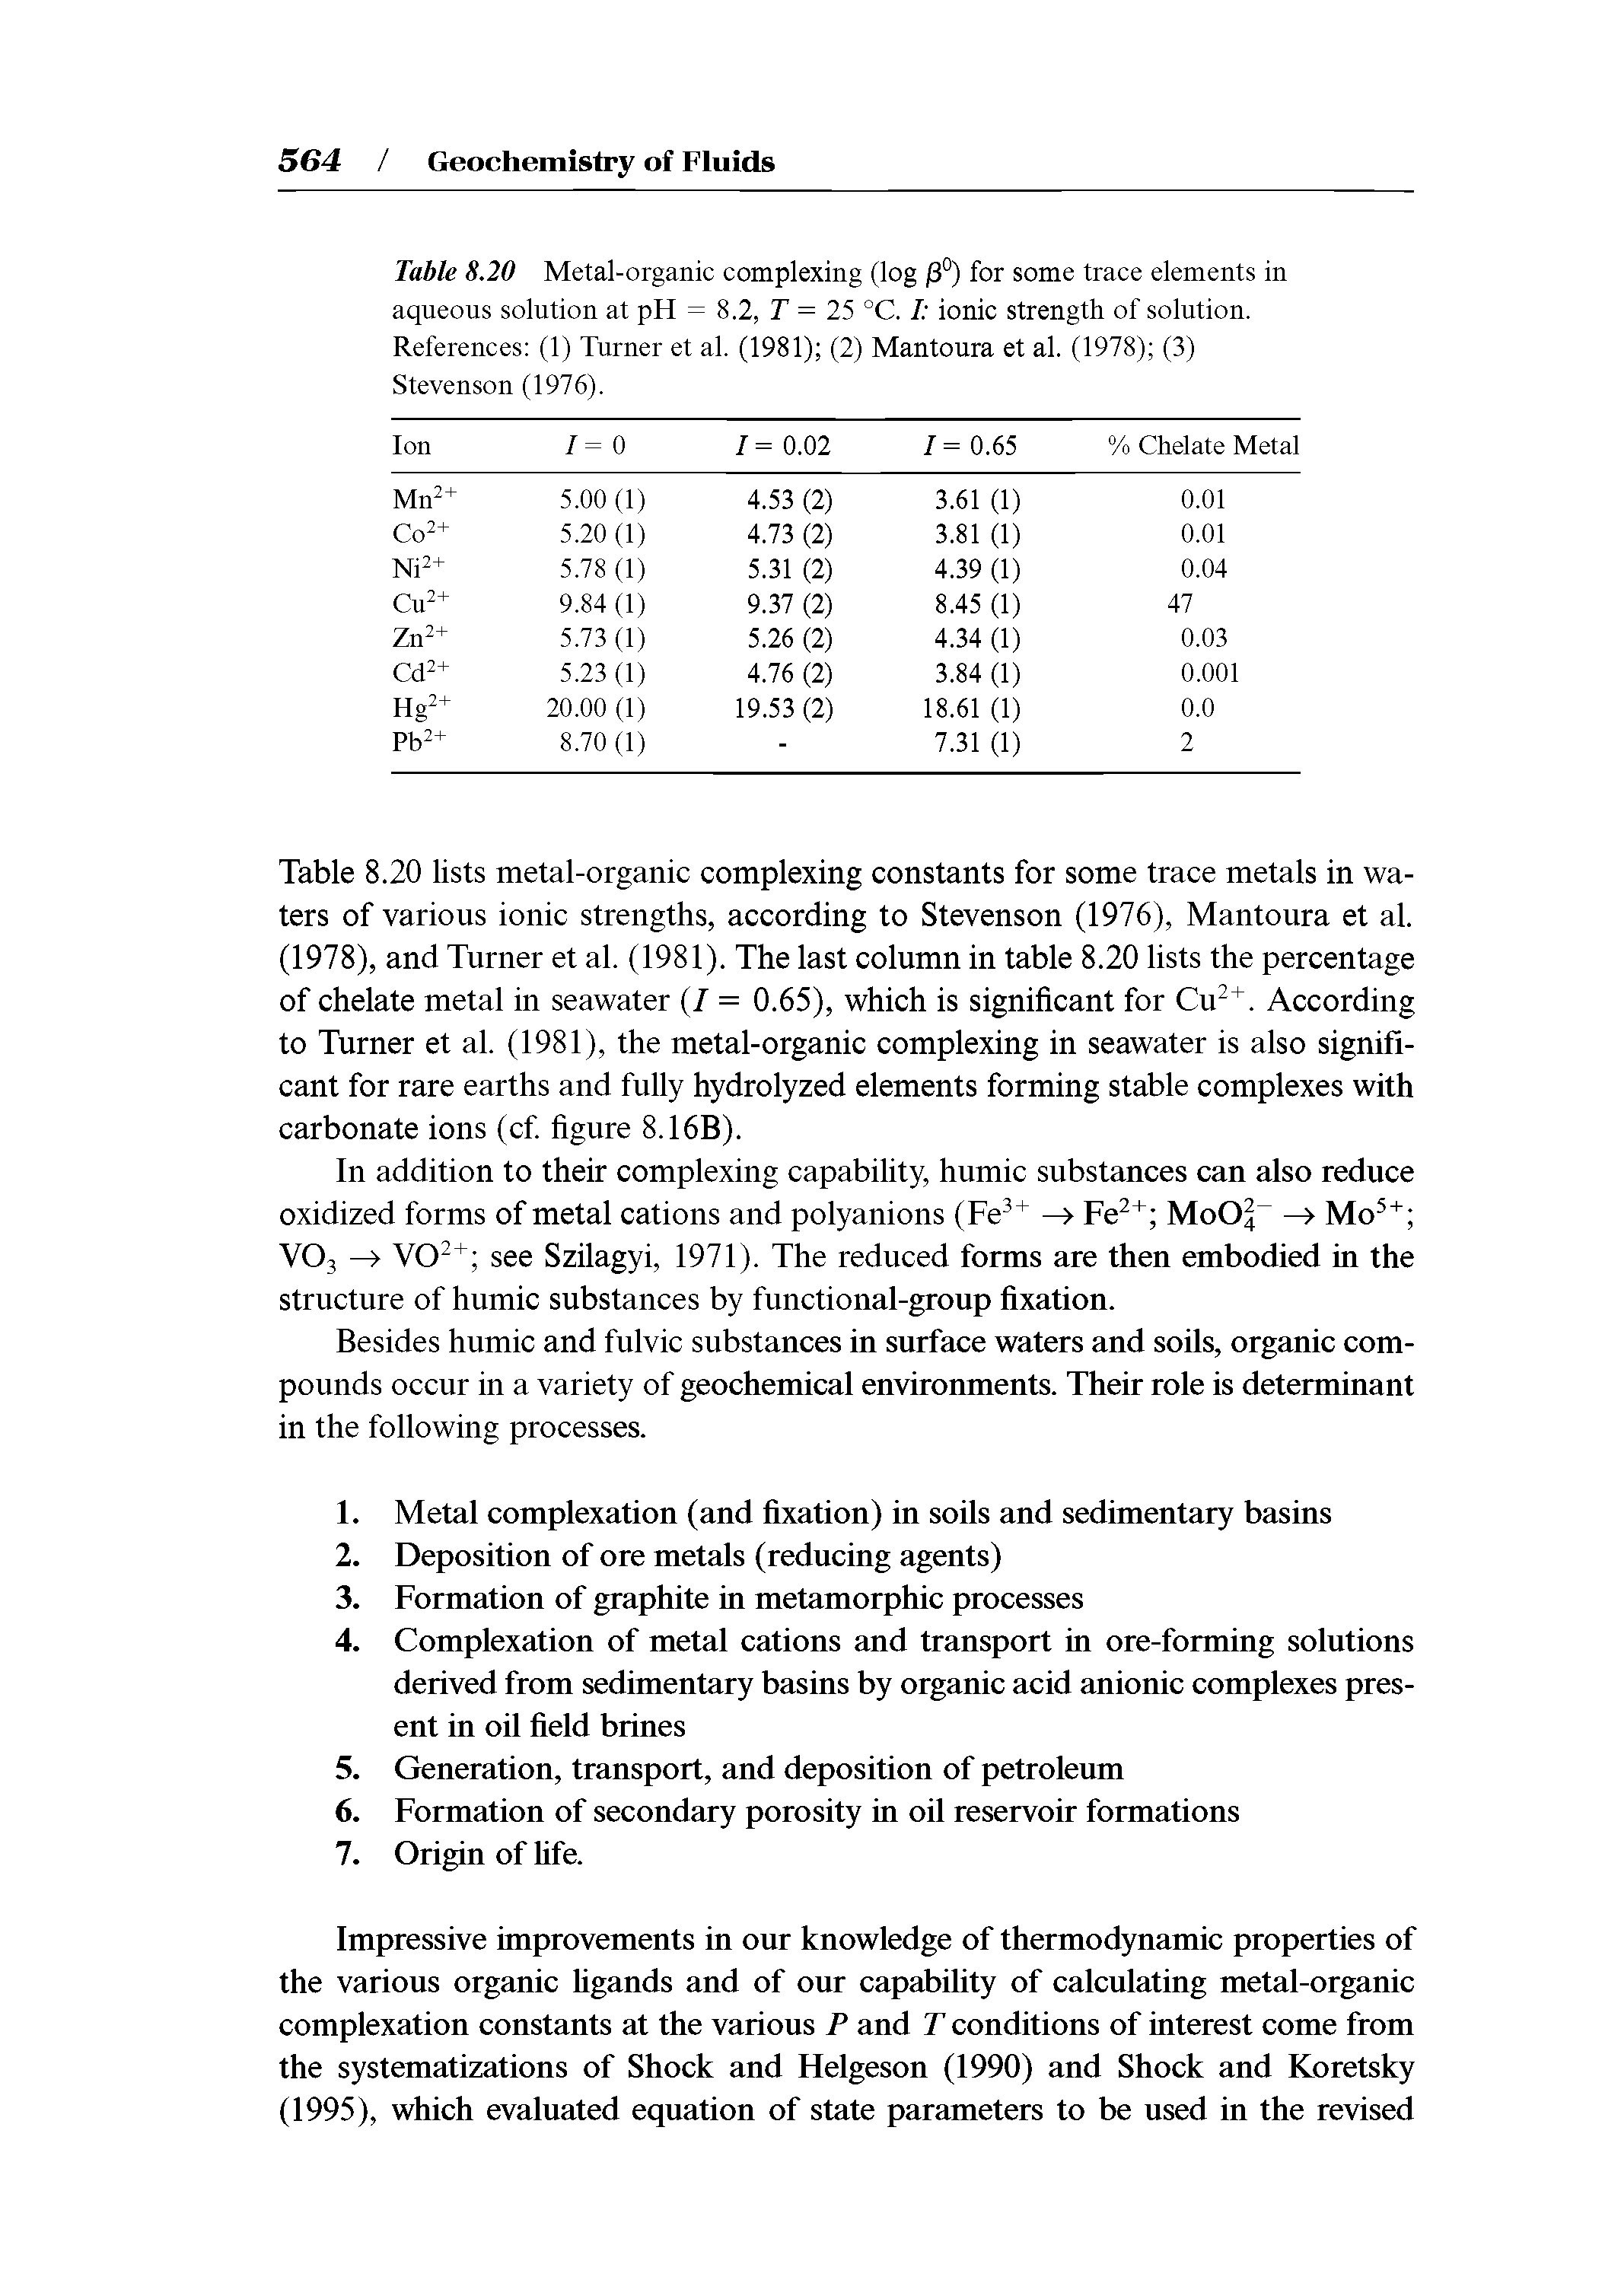 Table 8.20 Metal-organic complexing (log j3°) for some trace elements in aqueous solution at pH = 8.2, T = 25 °C. I ionic strength of solution. References (1) Turner et al. (1981) (2) Mantoura et al. (1978) (3) Stevenson (1976).